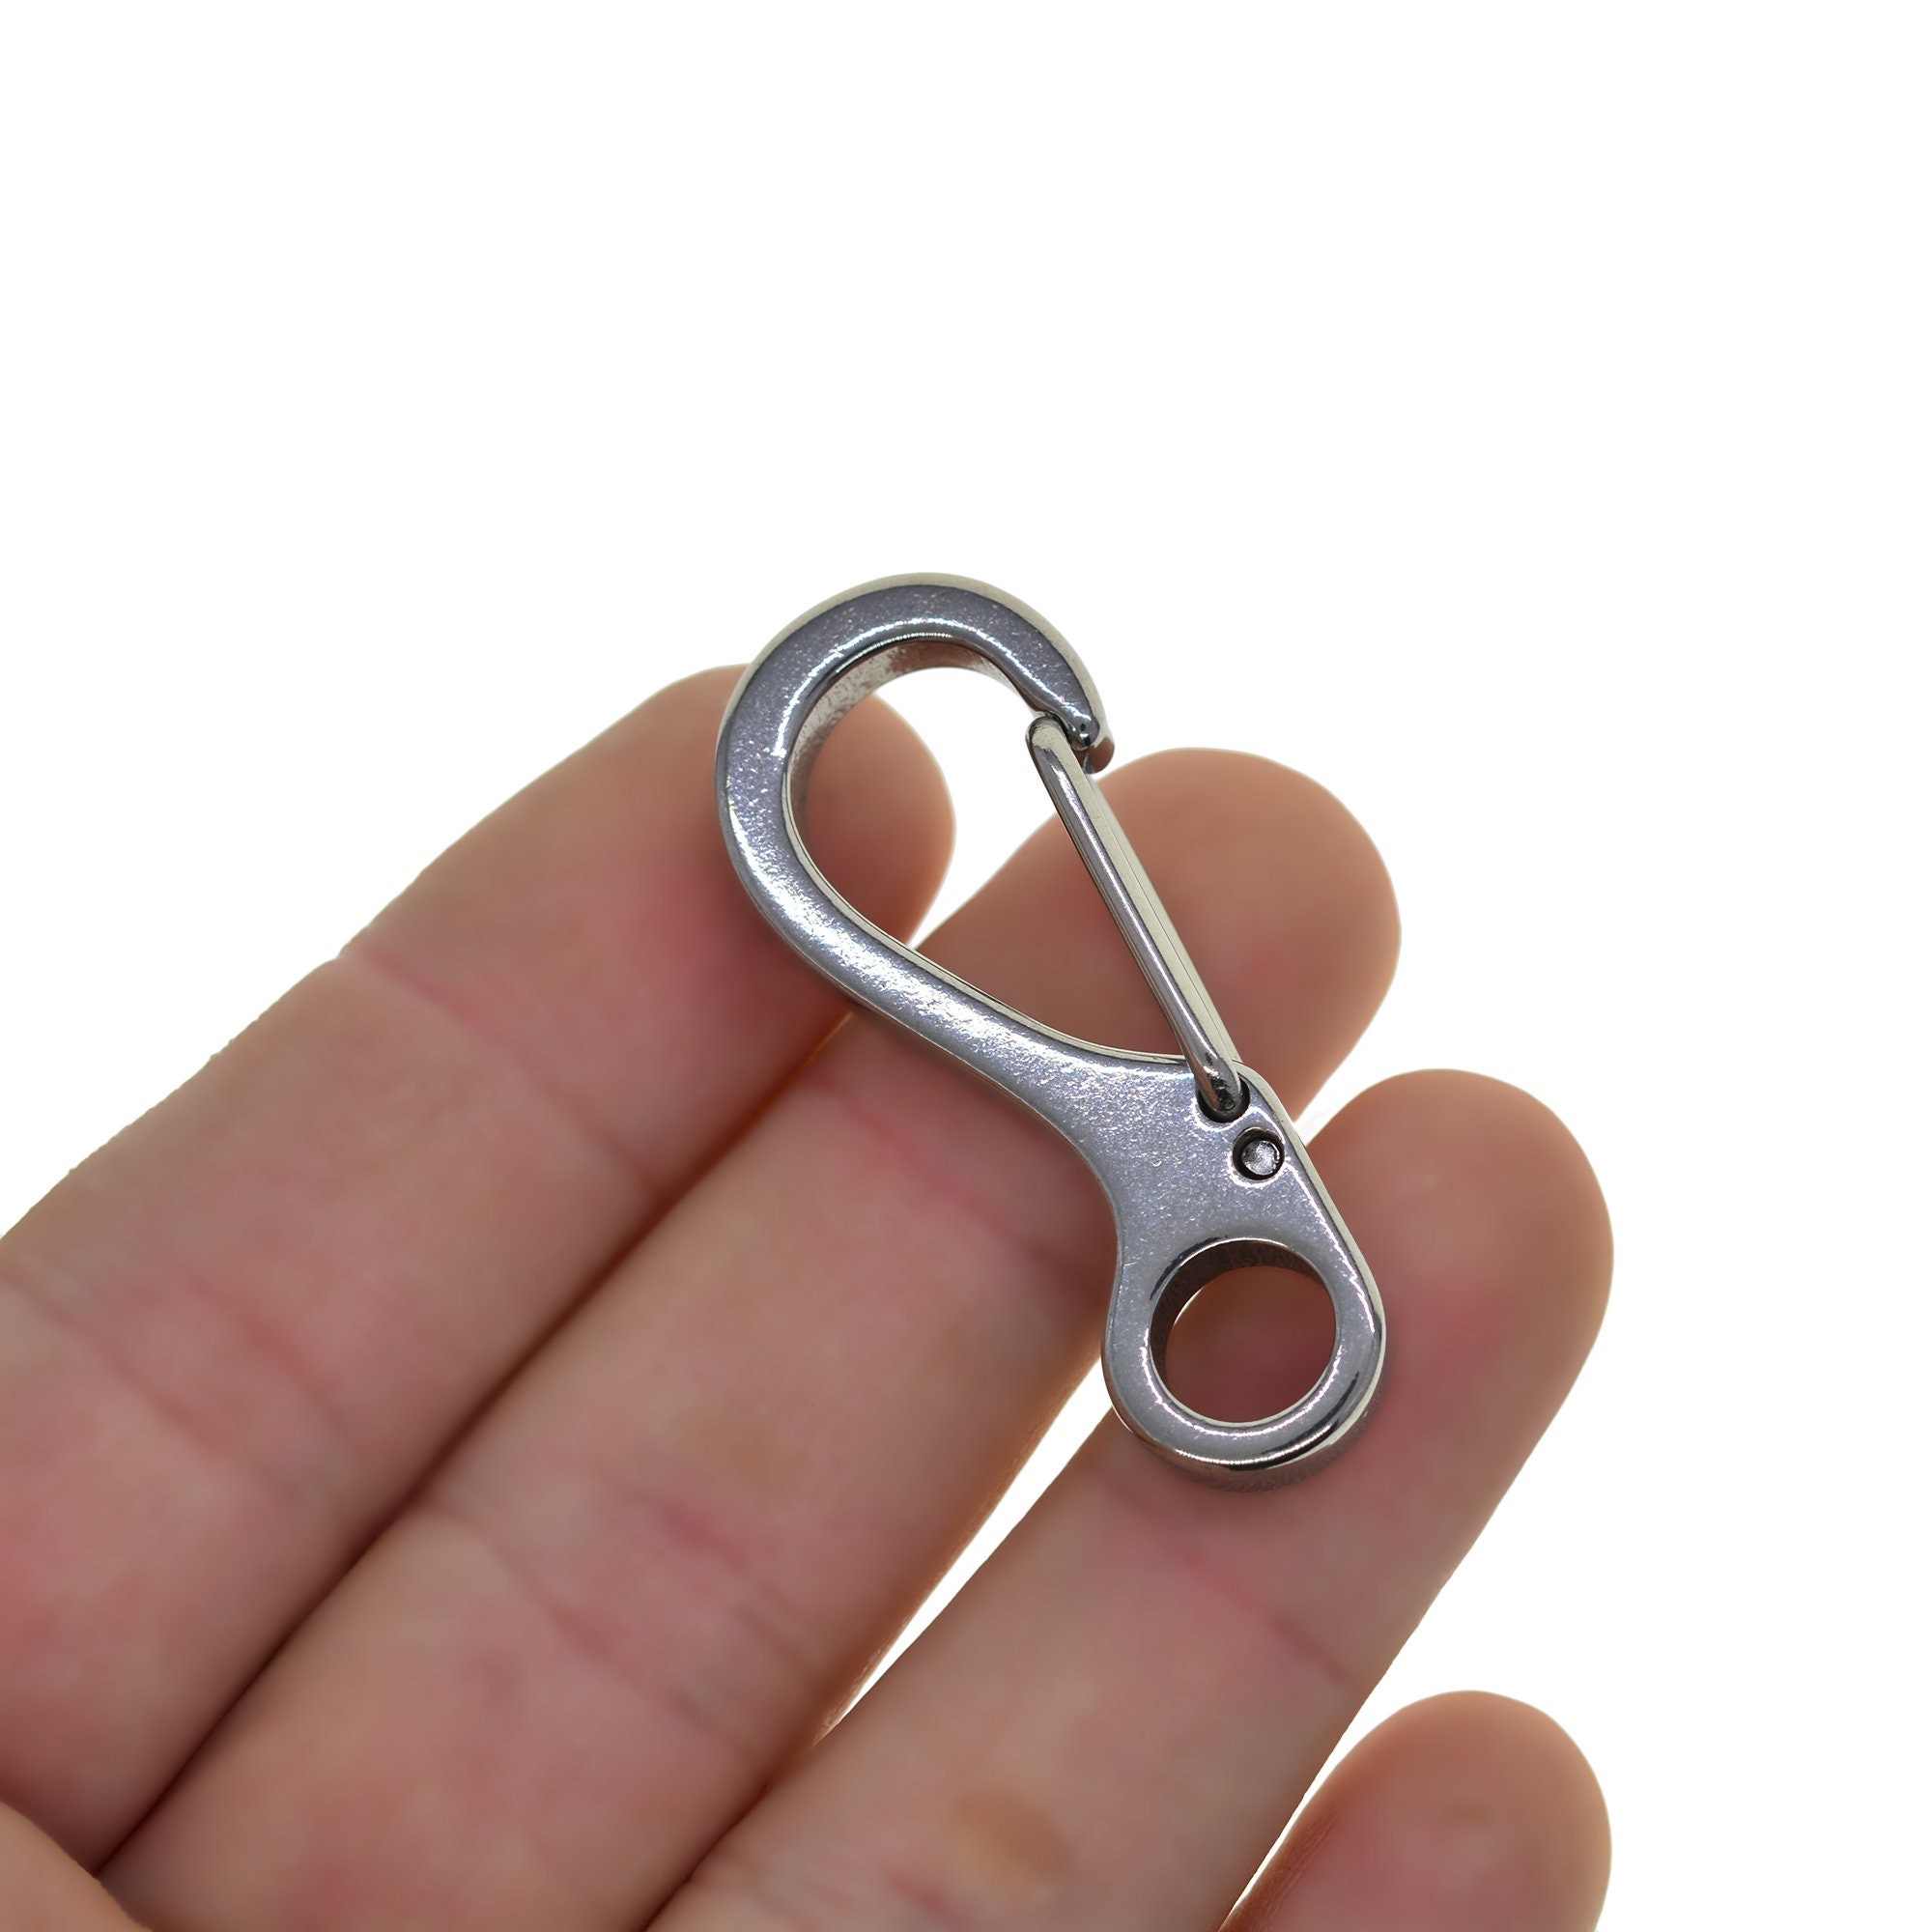 1 Inch Small Mini Tiny Super Strong Fine Ti Solid Stainless Steel Spring Snap  Hook Quick Release Carabiner Paracord Clasp Diving EDC DIY 